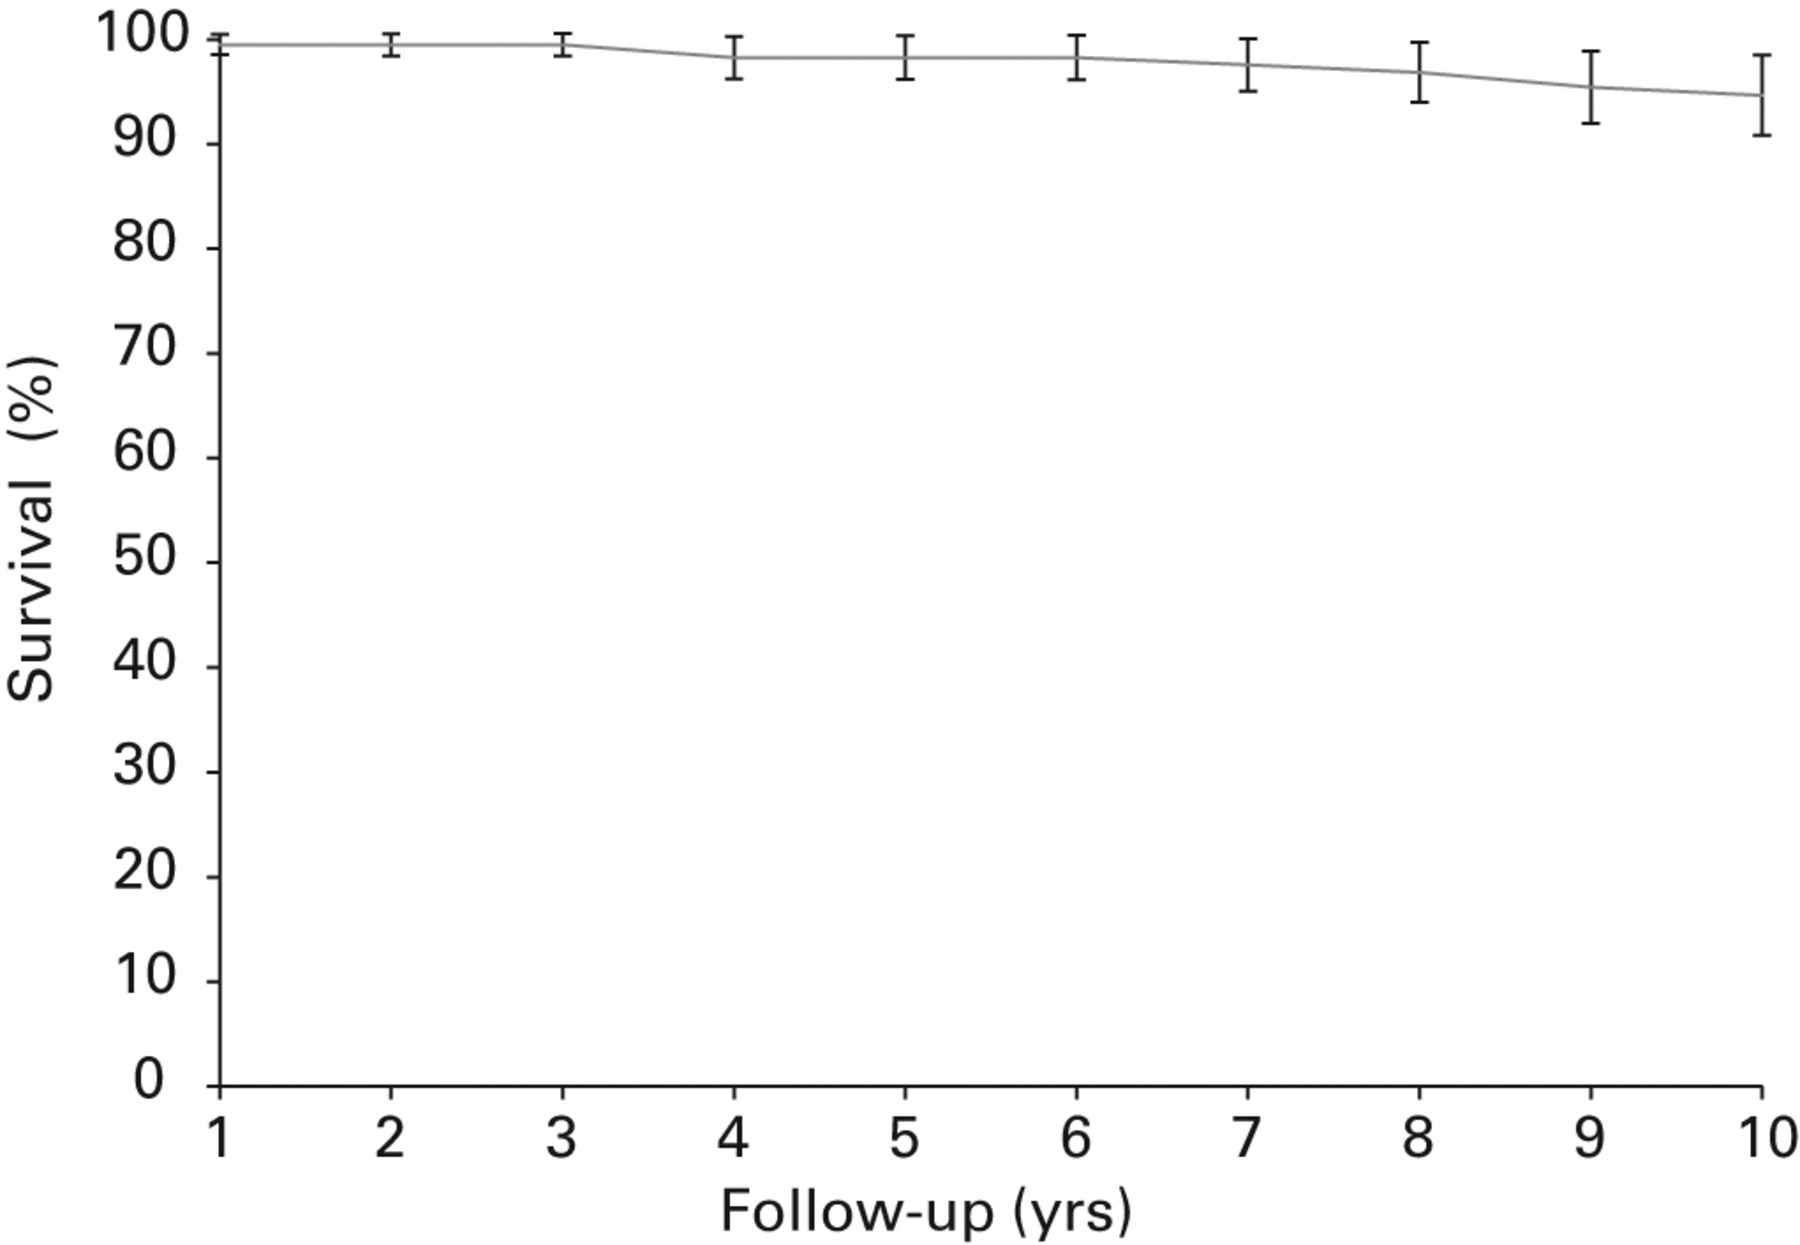 Fig. 2 
          Implant survivorship at 10 years - survival
curve showing survival of the minimally Oxford phase III unicompartmental knee
arthroplasty with non-implant related revisions as the endpoint.
        